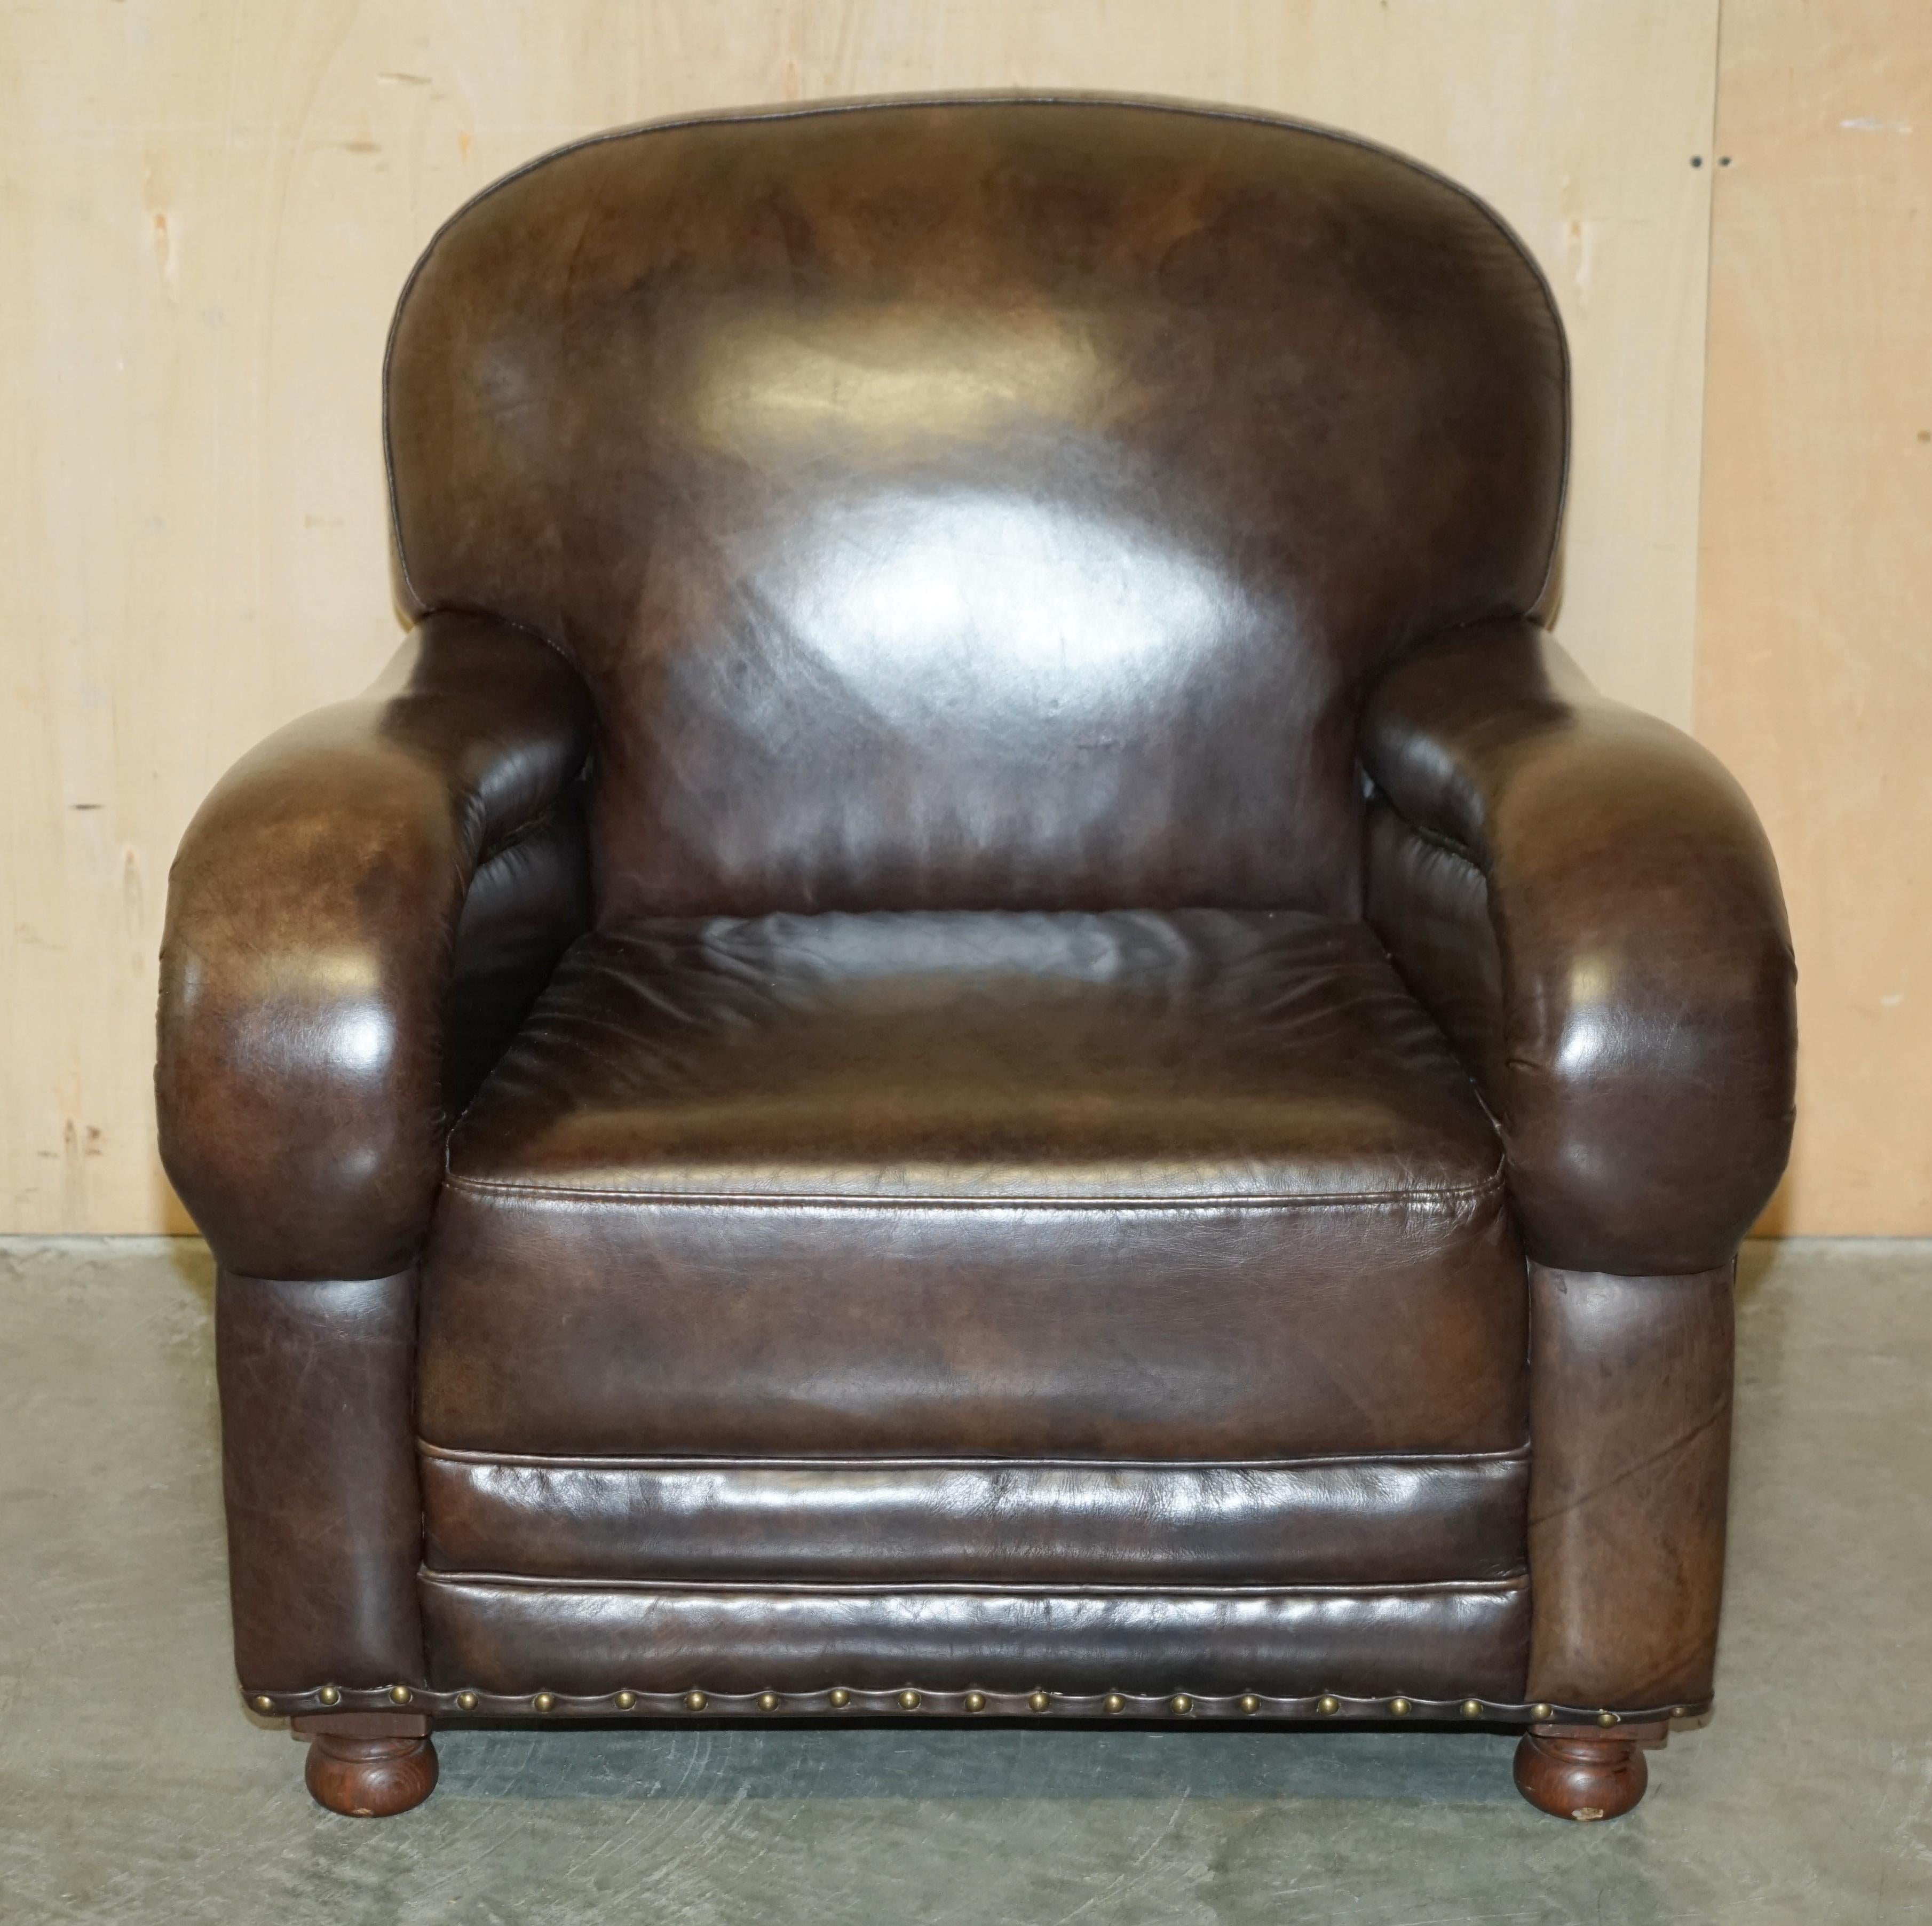 Royal House Antiques

Royal House Antiques is delighted to offer for sale this lovely hand dyed brown leather club armchair which has been discontinued for many years now

Please note the delivery fee listed is just a guide, it covers within the M25